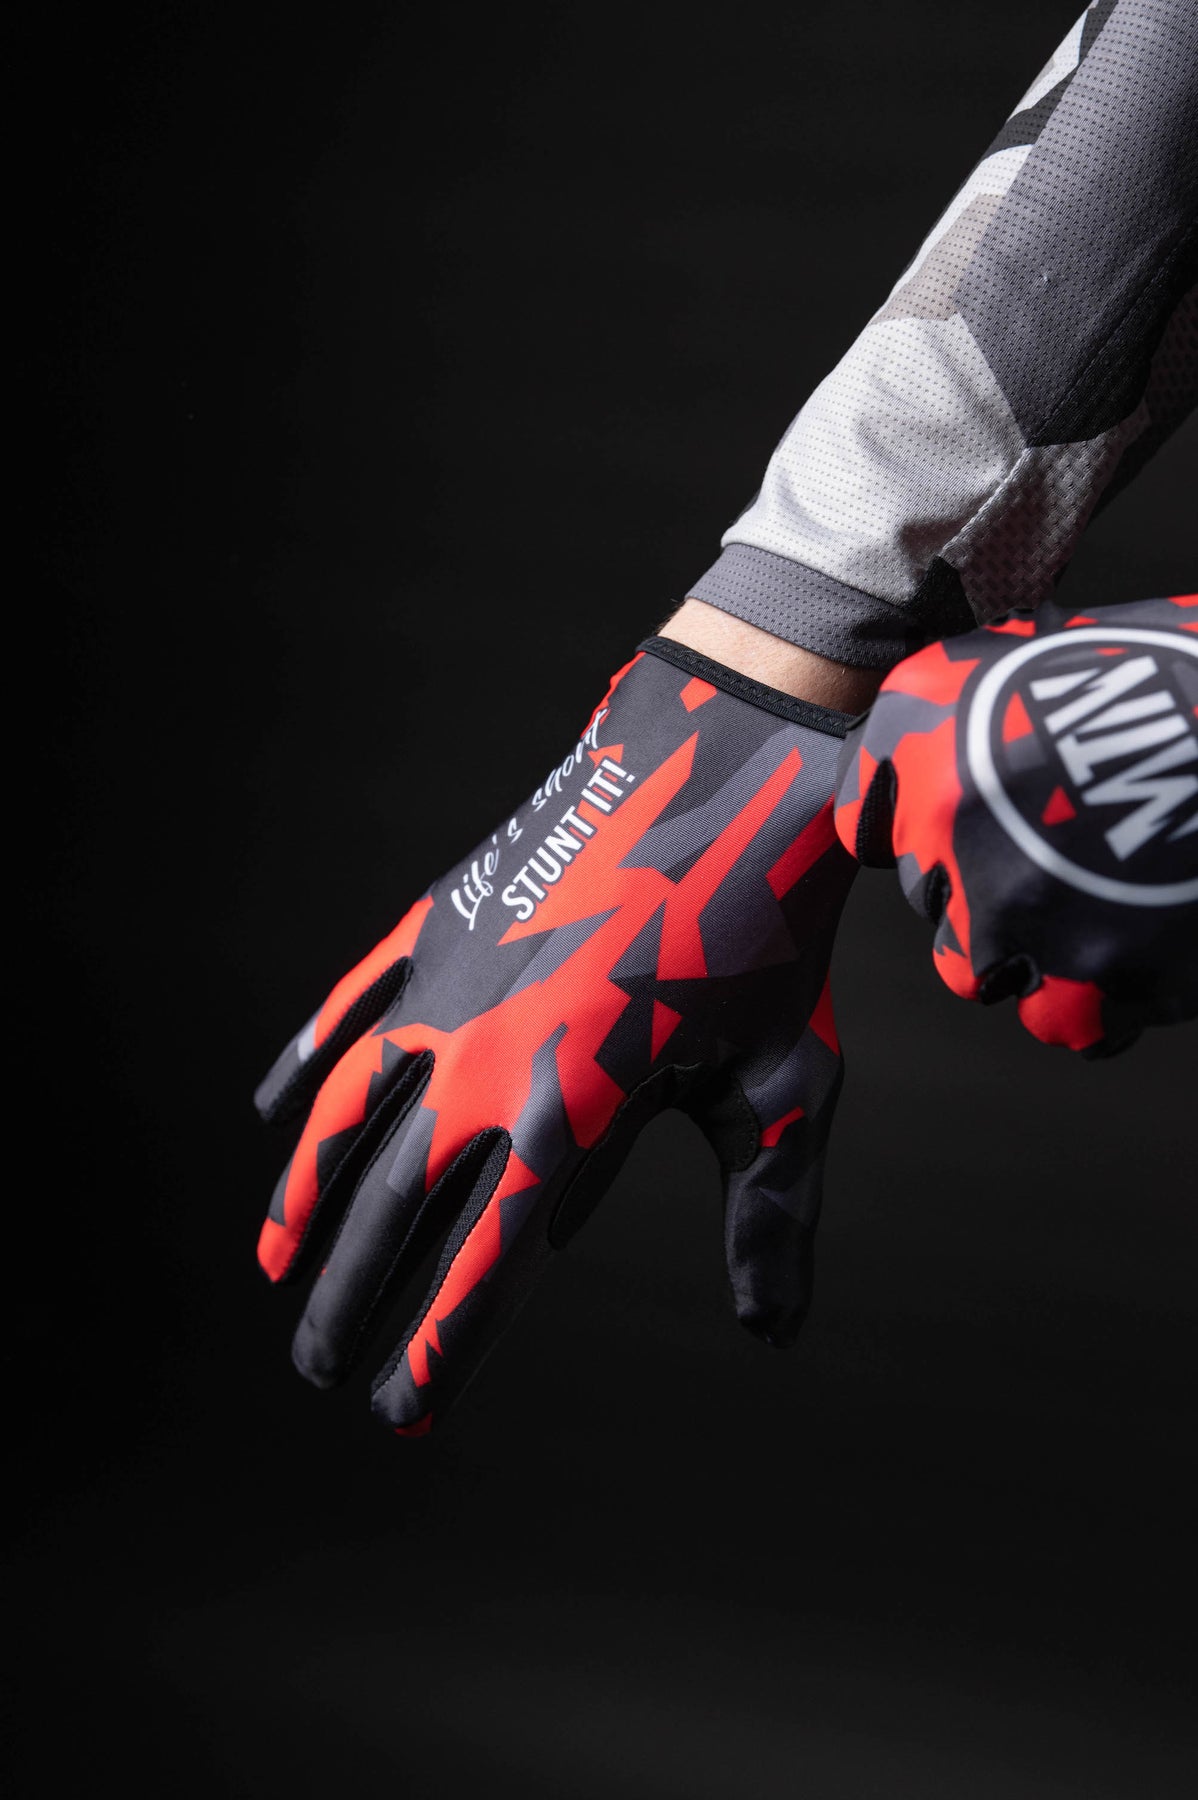 Red-Camo – The Handschuhe MTB Brand Motion